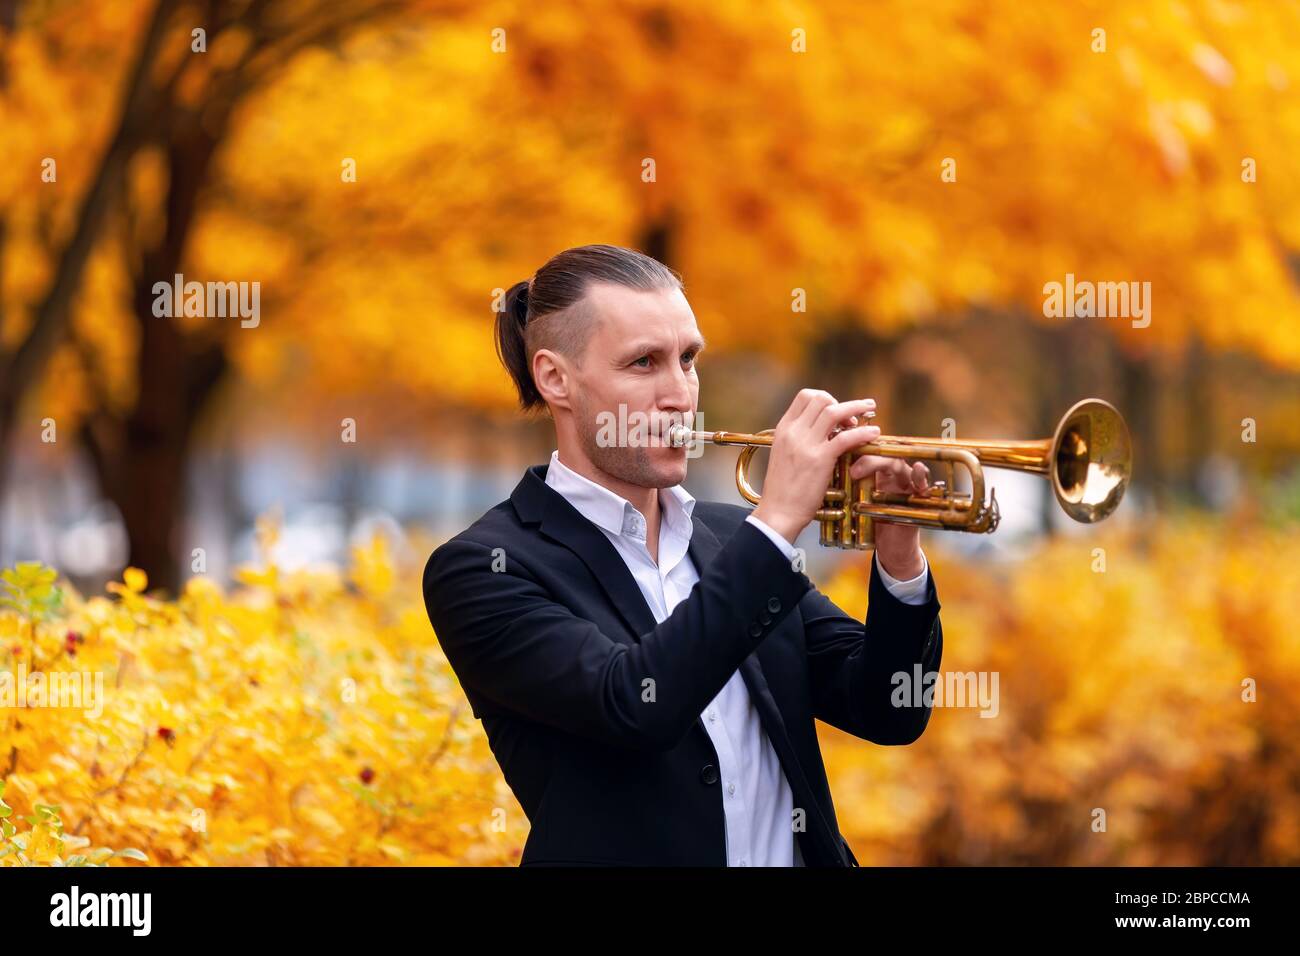 young European handsome trumpeter in formal clothes playing his musical instrument golden trumpet among trees with yellow leaves in autumn park Stock Photo